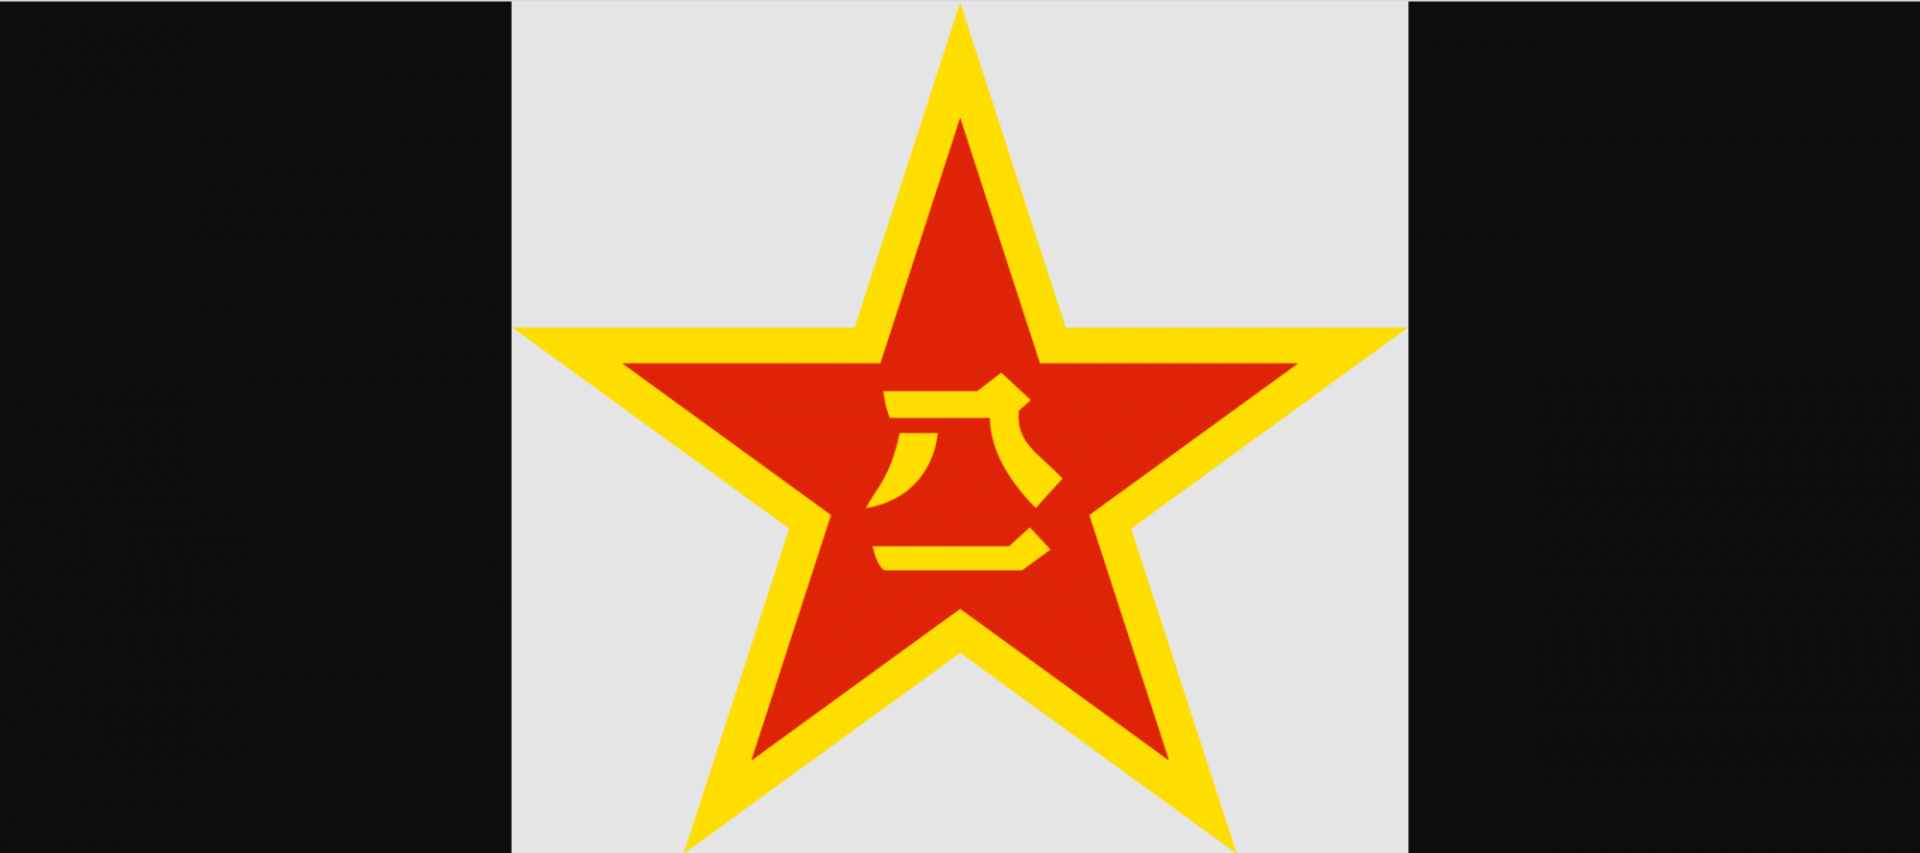 People's Liberation Army
Armed wing of the Chinese Communist Party and principal military force of the People's Republic of China